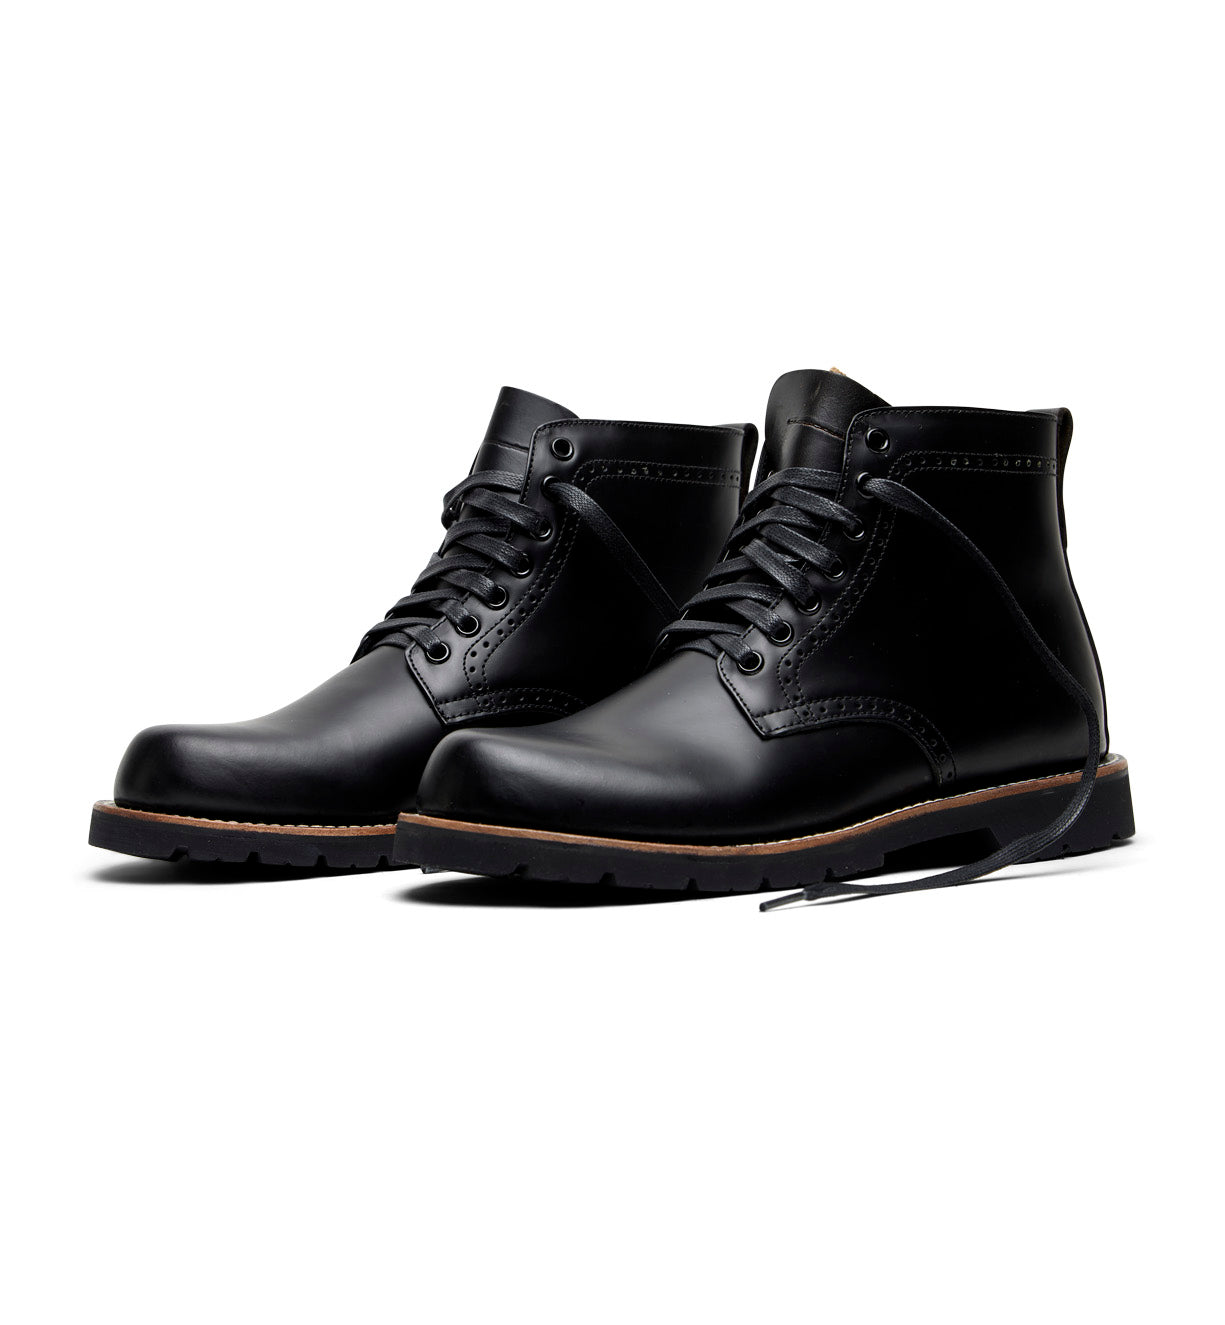 A pair of Broken Homme Tydus full grain leather boots on a white background with a refined style.